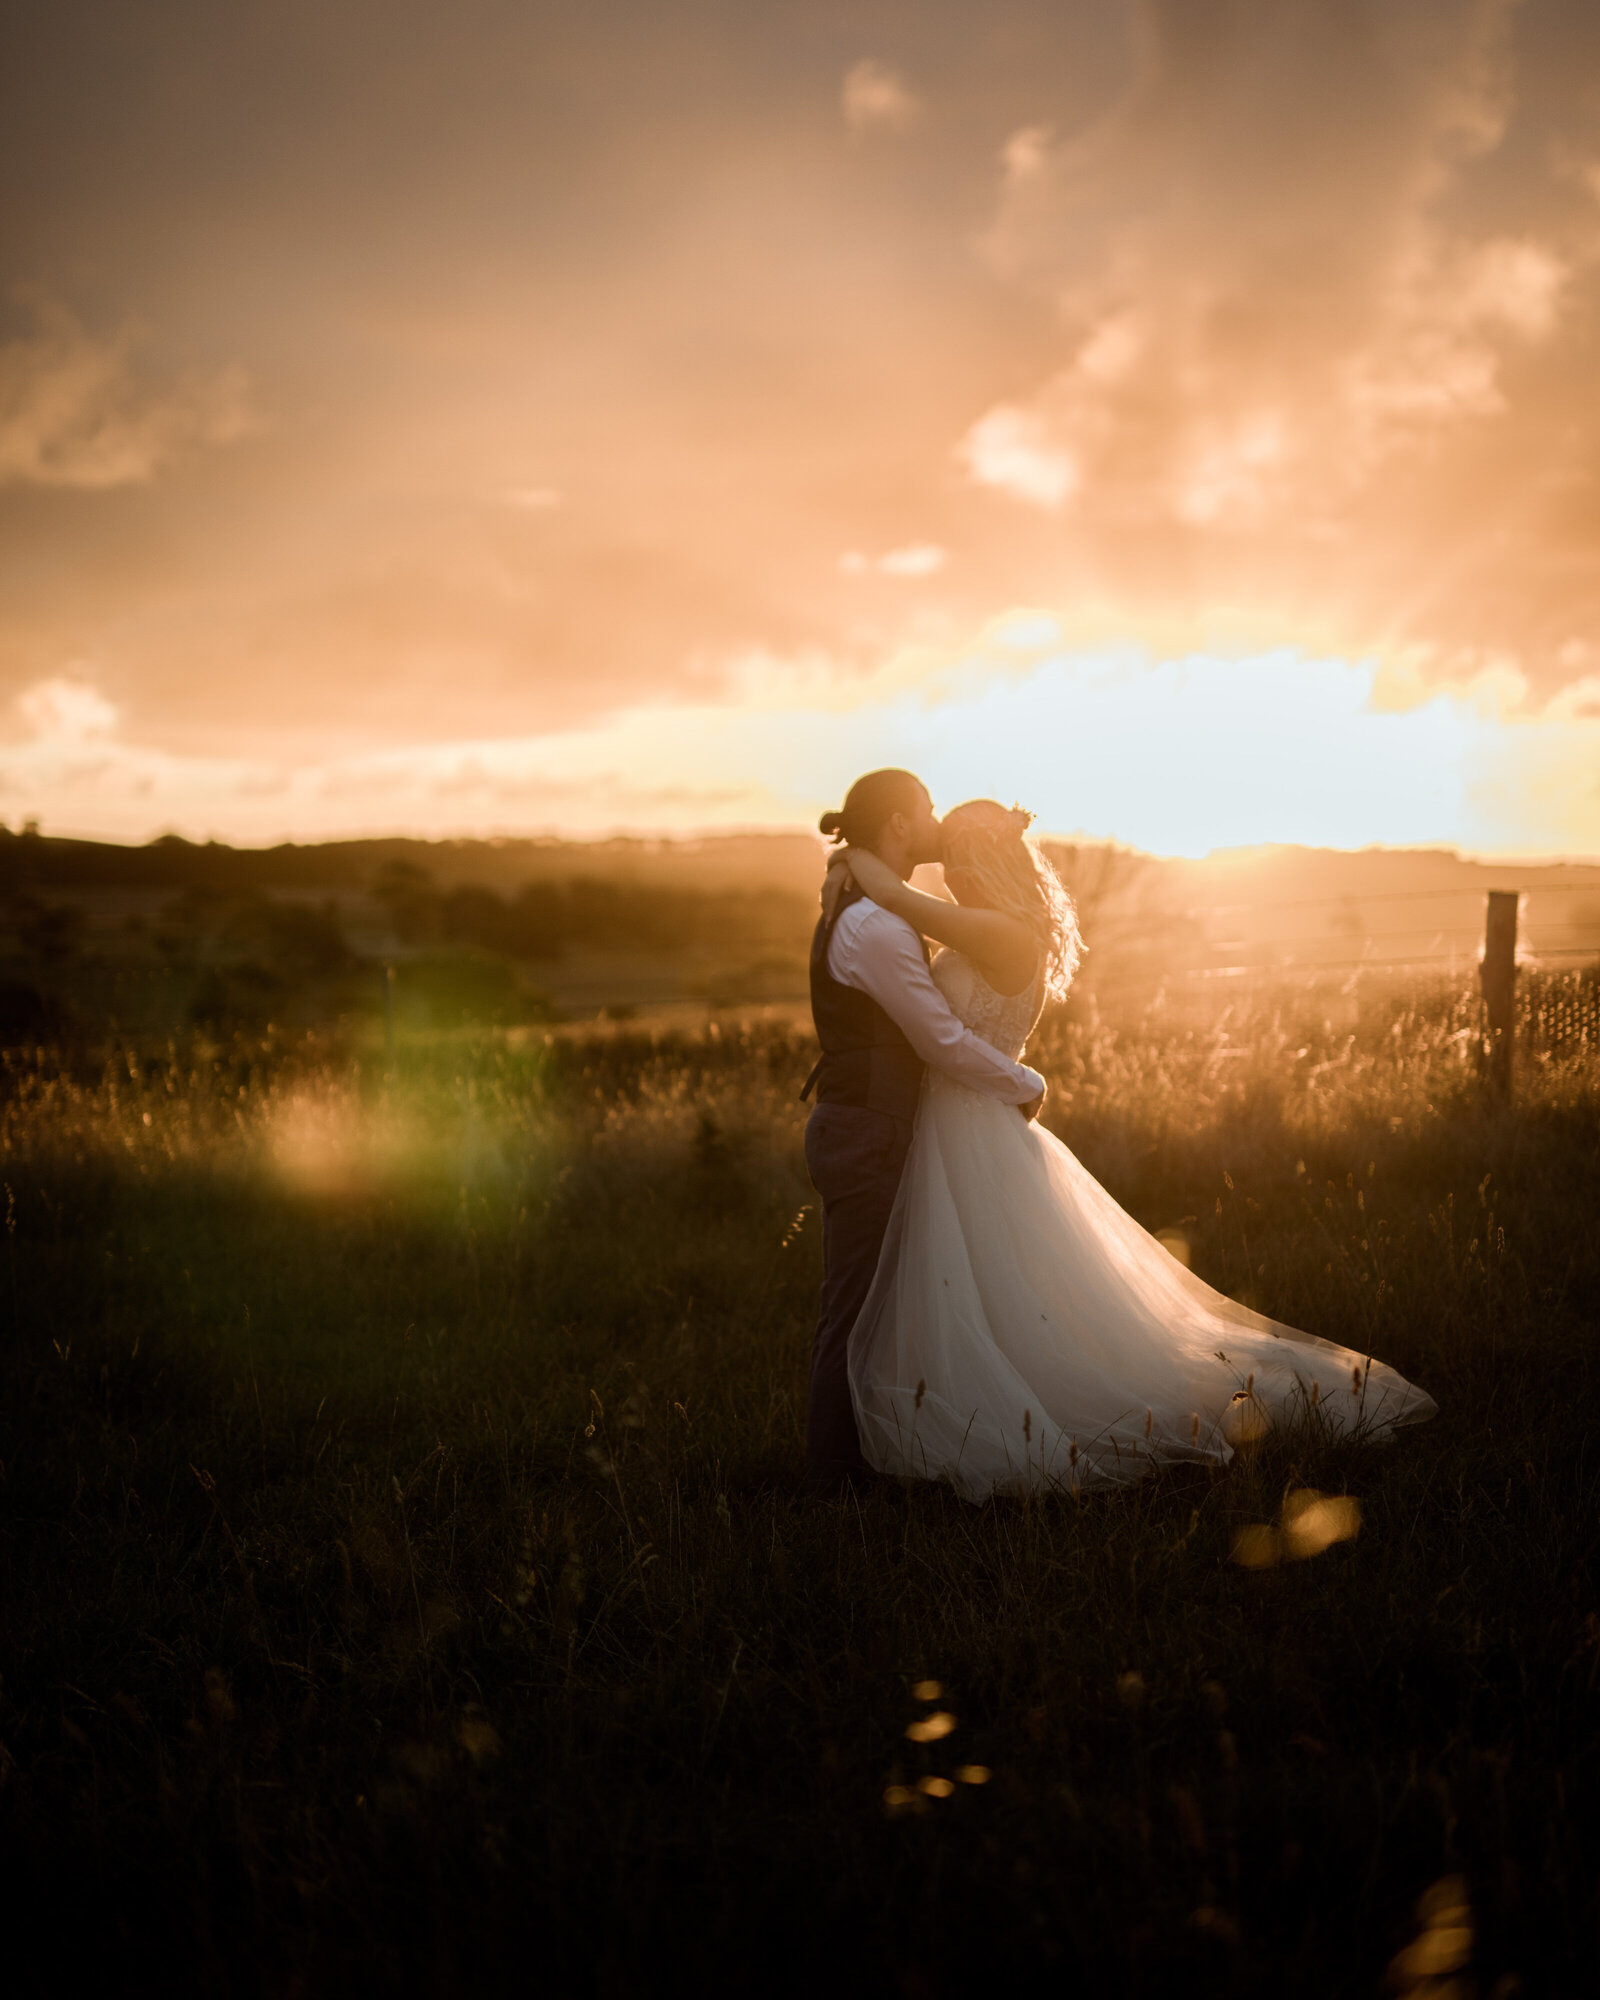 Meagan-Charlie-Wedding-Mount-Gambier-Rexvil-Photography-130